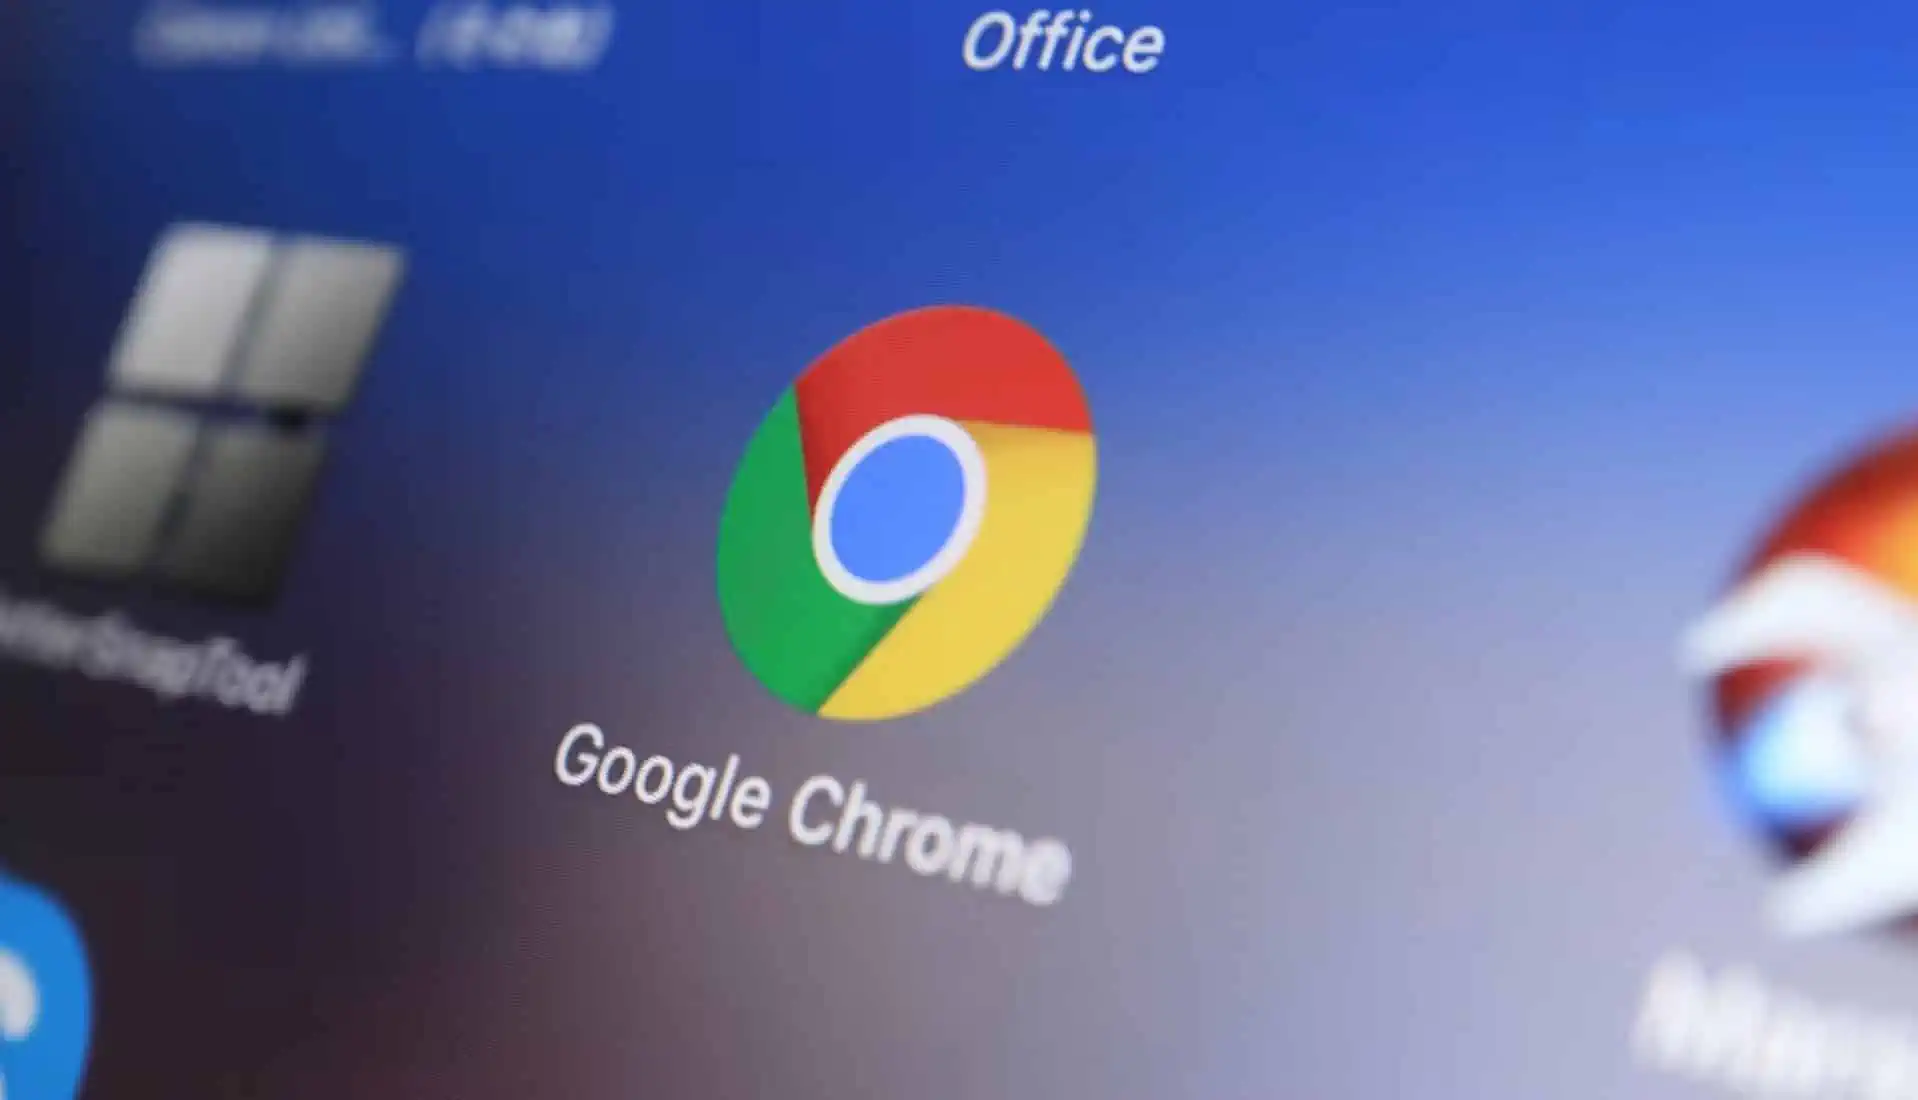 Chrome urges users to move to Windows 10 or later as Windows 7, 8.1 end-of-support date nears